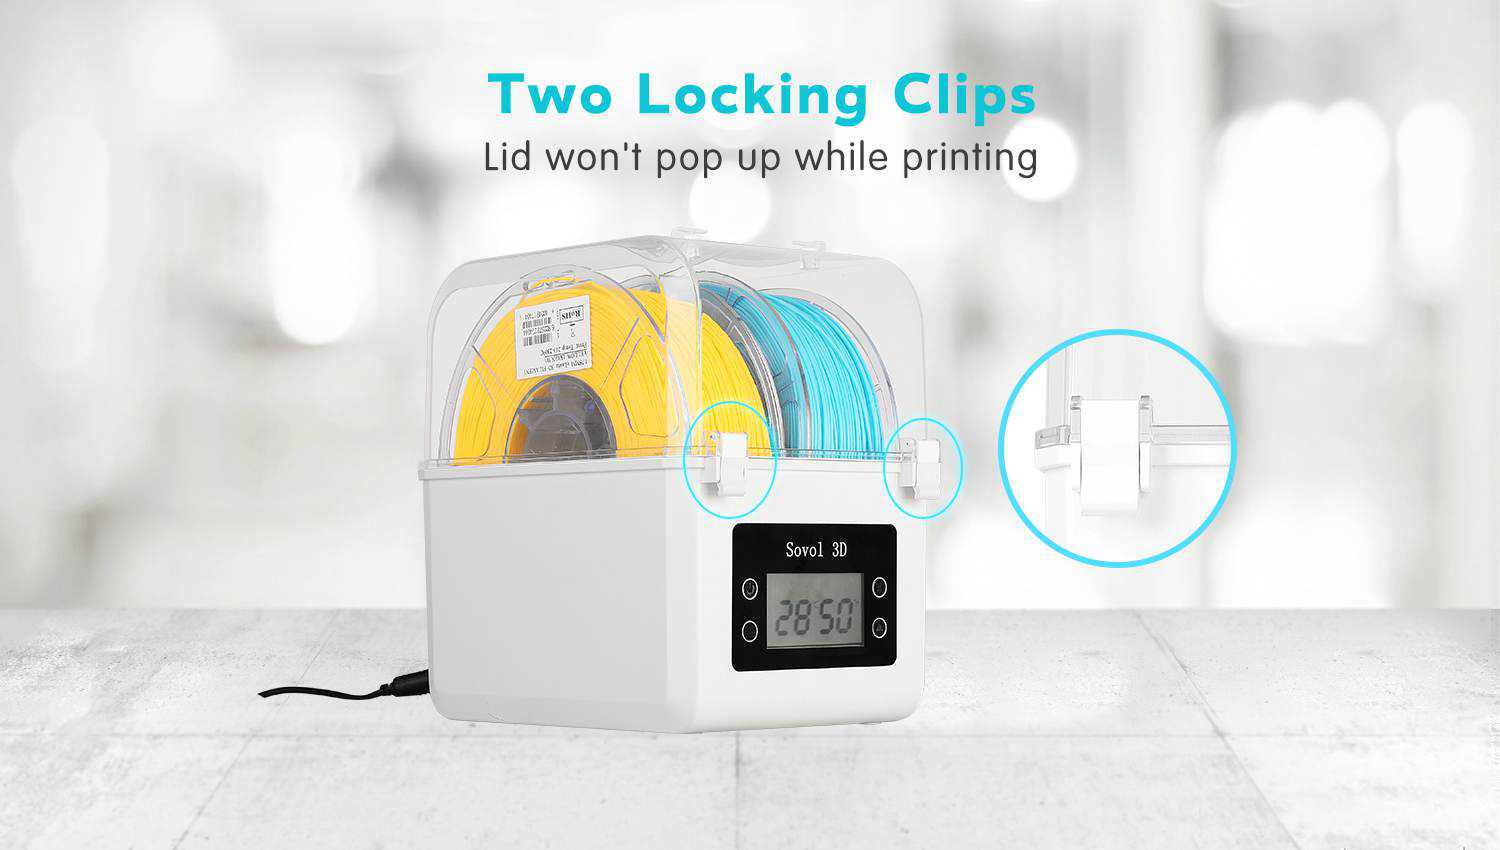 filament-dryer-3d-printer-with-two-locking-clips